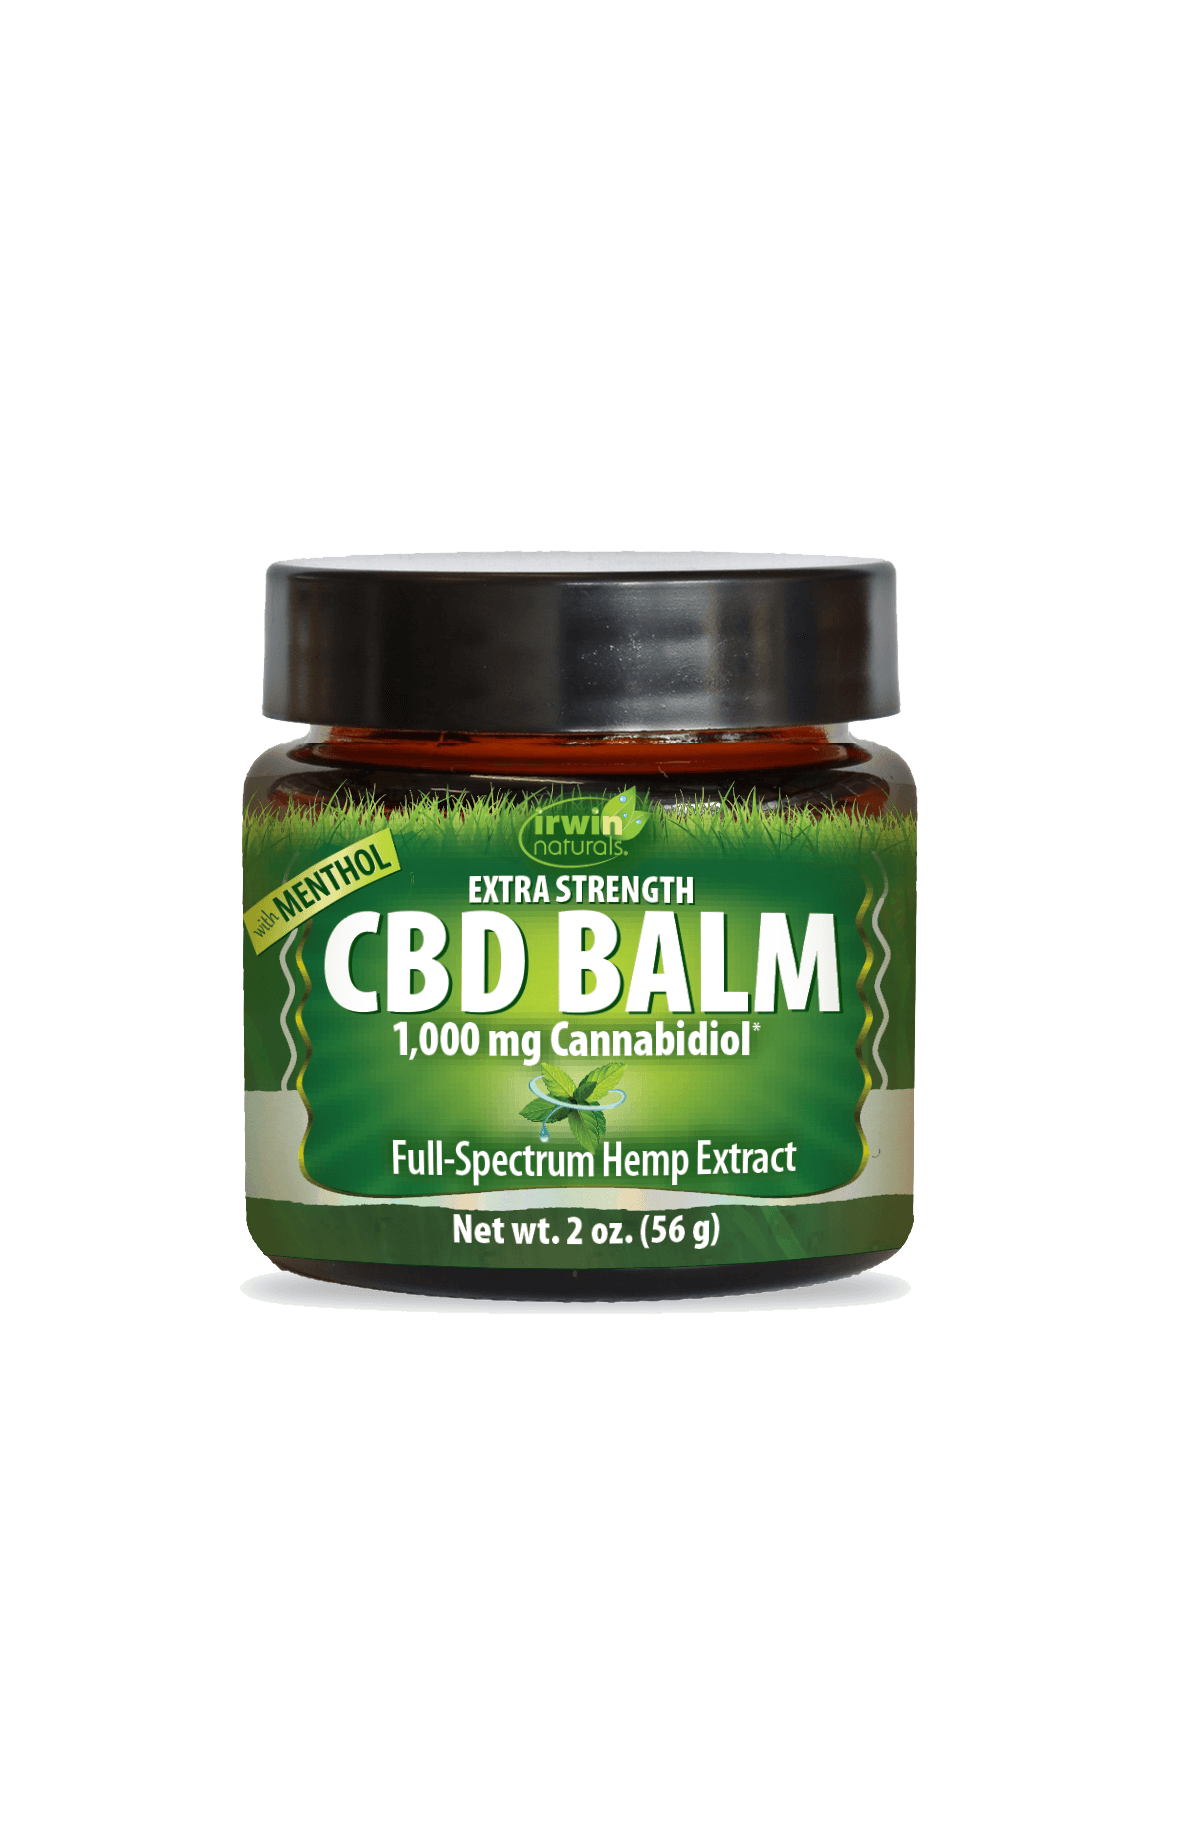 Extra Strength CBD Balm 1000 mg Cannabidiol with Menthol by Irwin Naturals